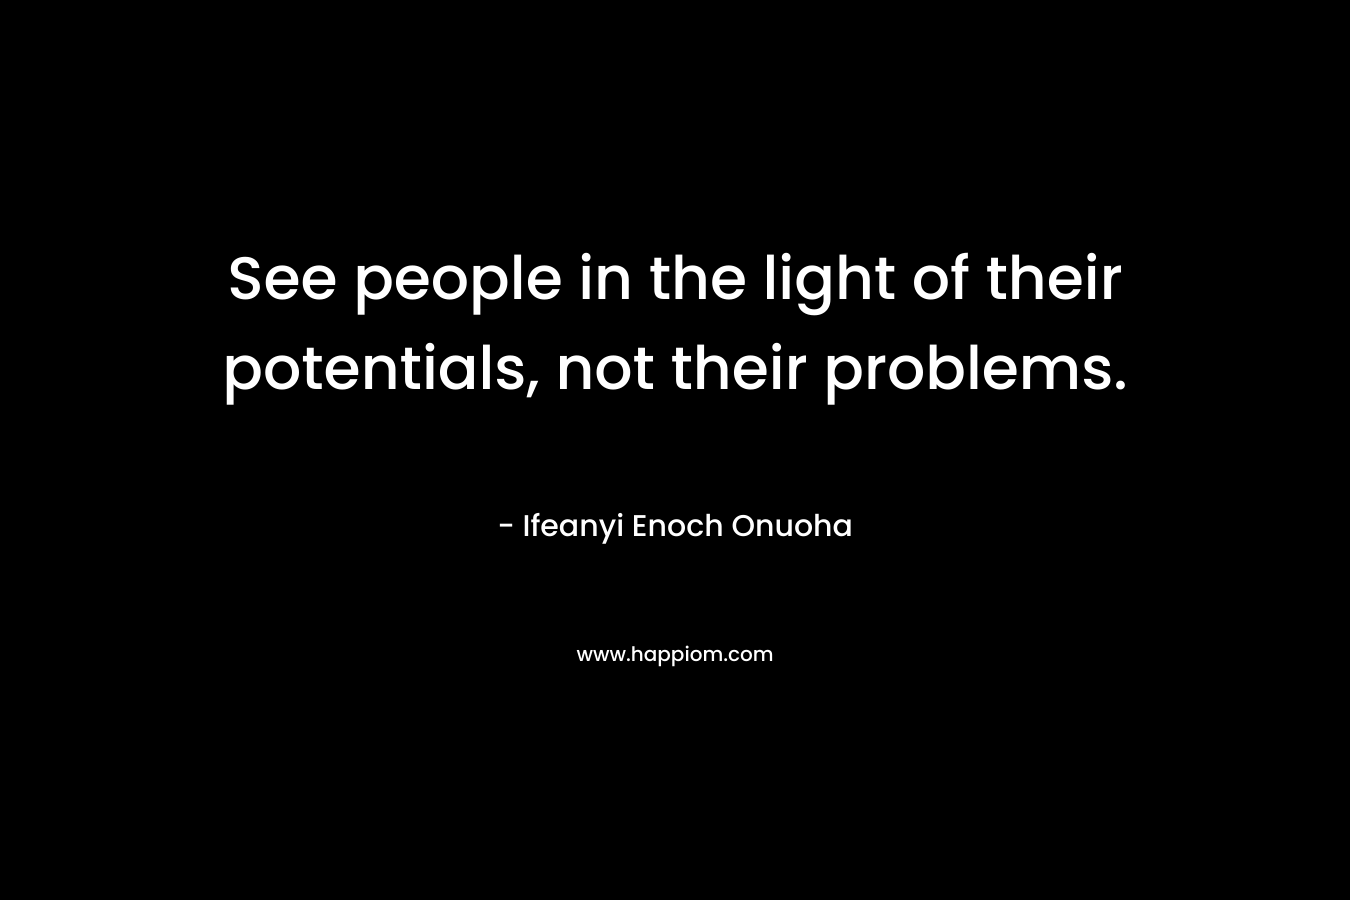 See people in the light of their potentials, not their problems.